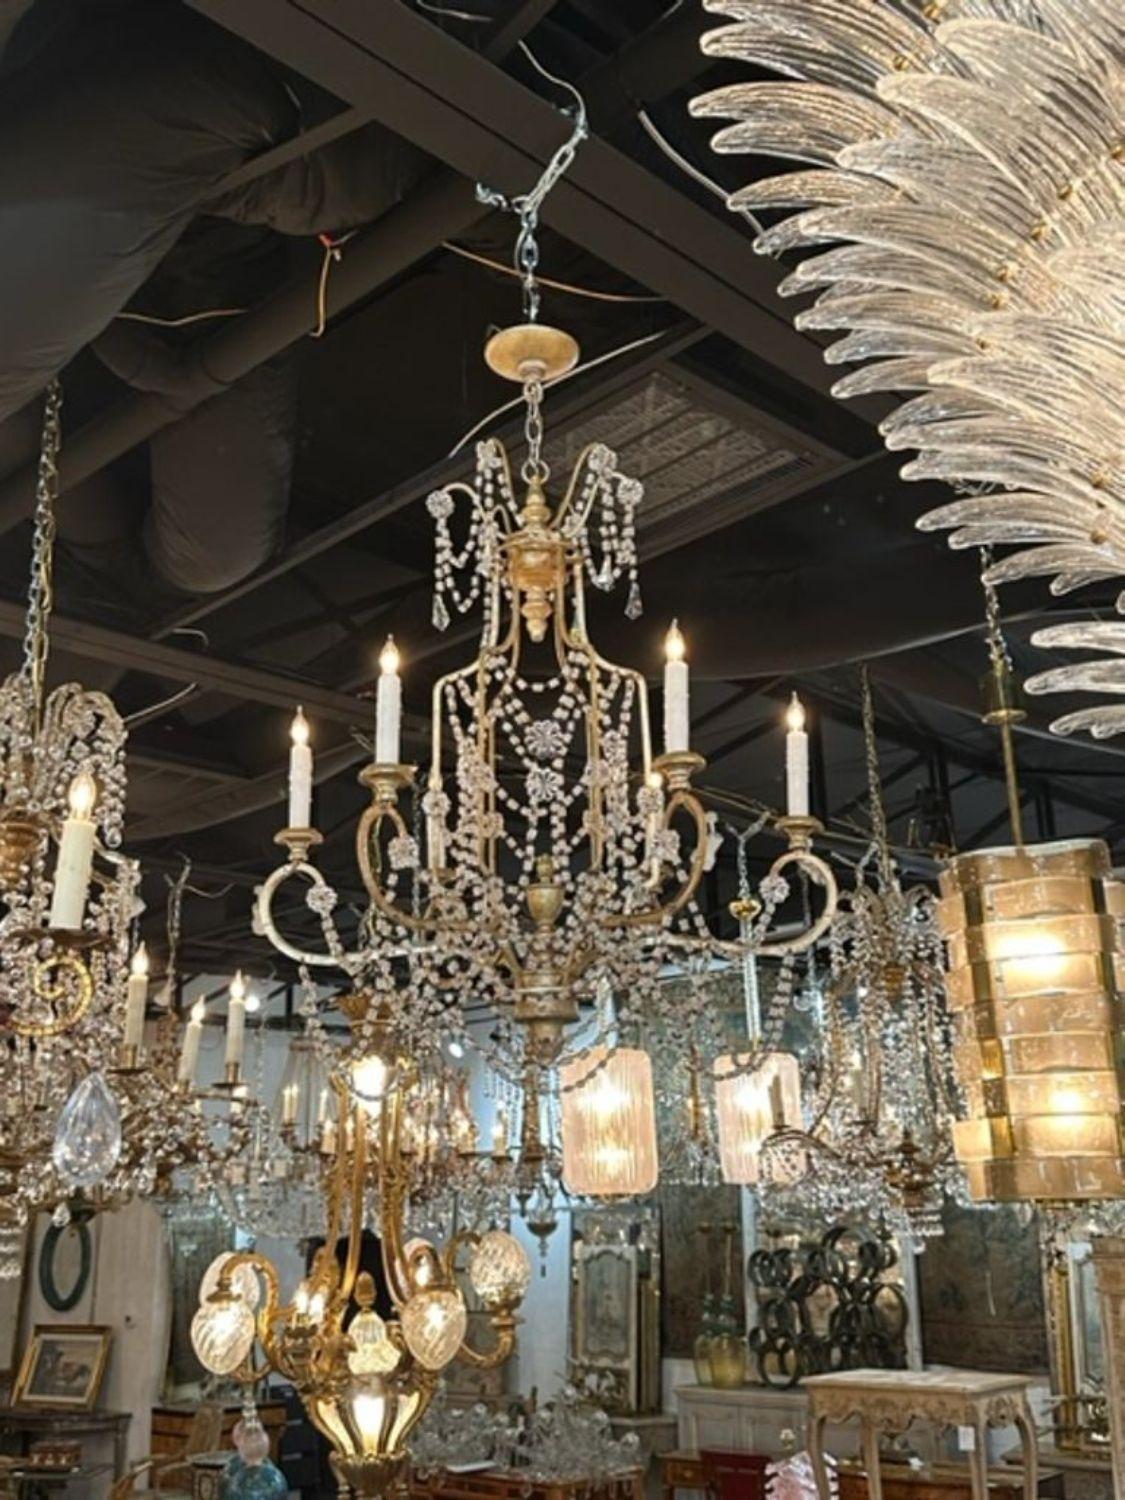 Beautiful 19th century Italian crystal and silver gilt pagoda chandelier with 6 lights.  Makes an elegant statement!